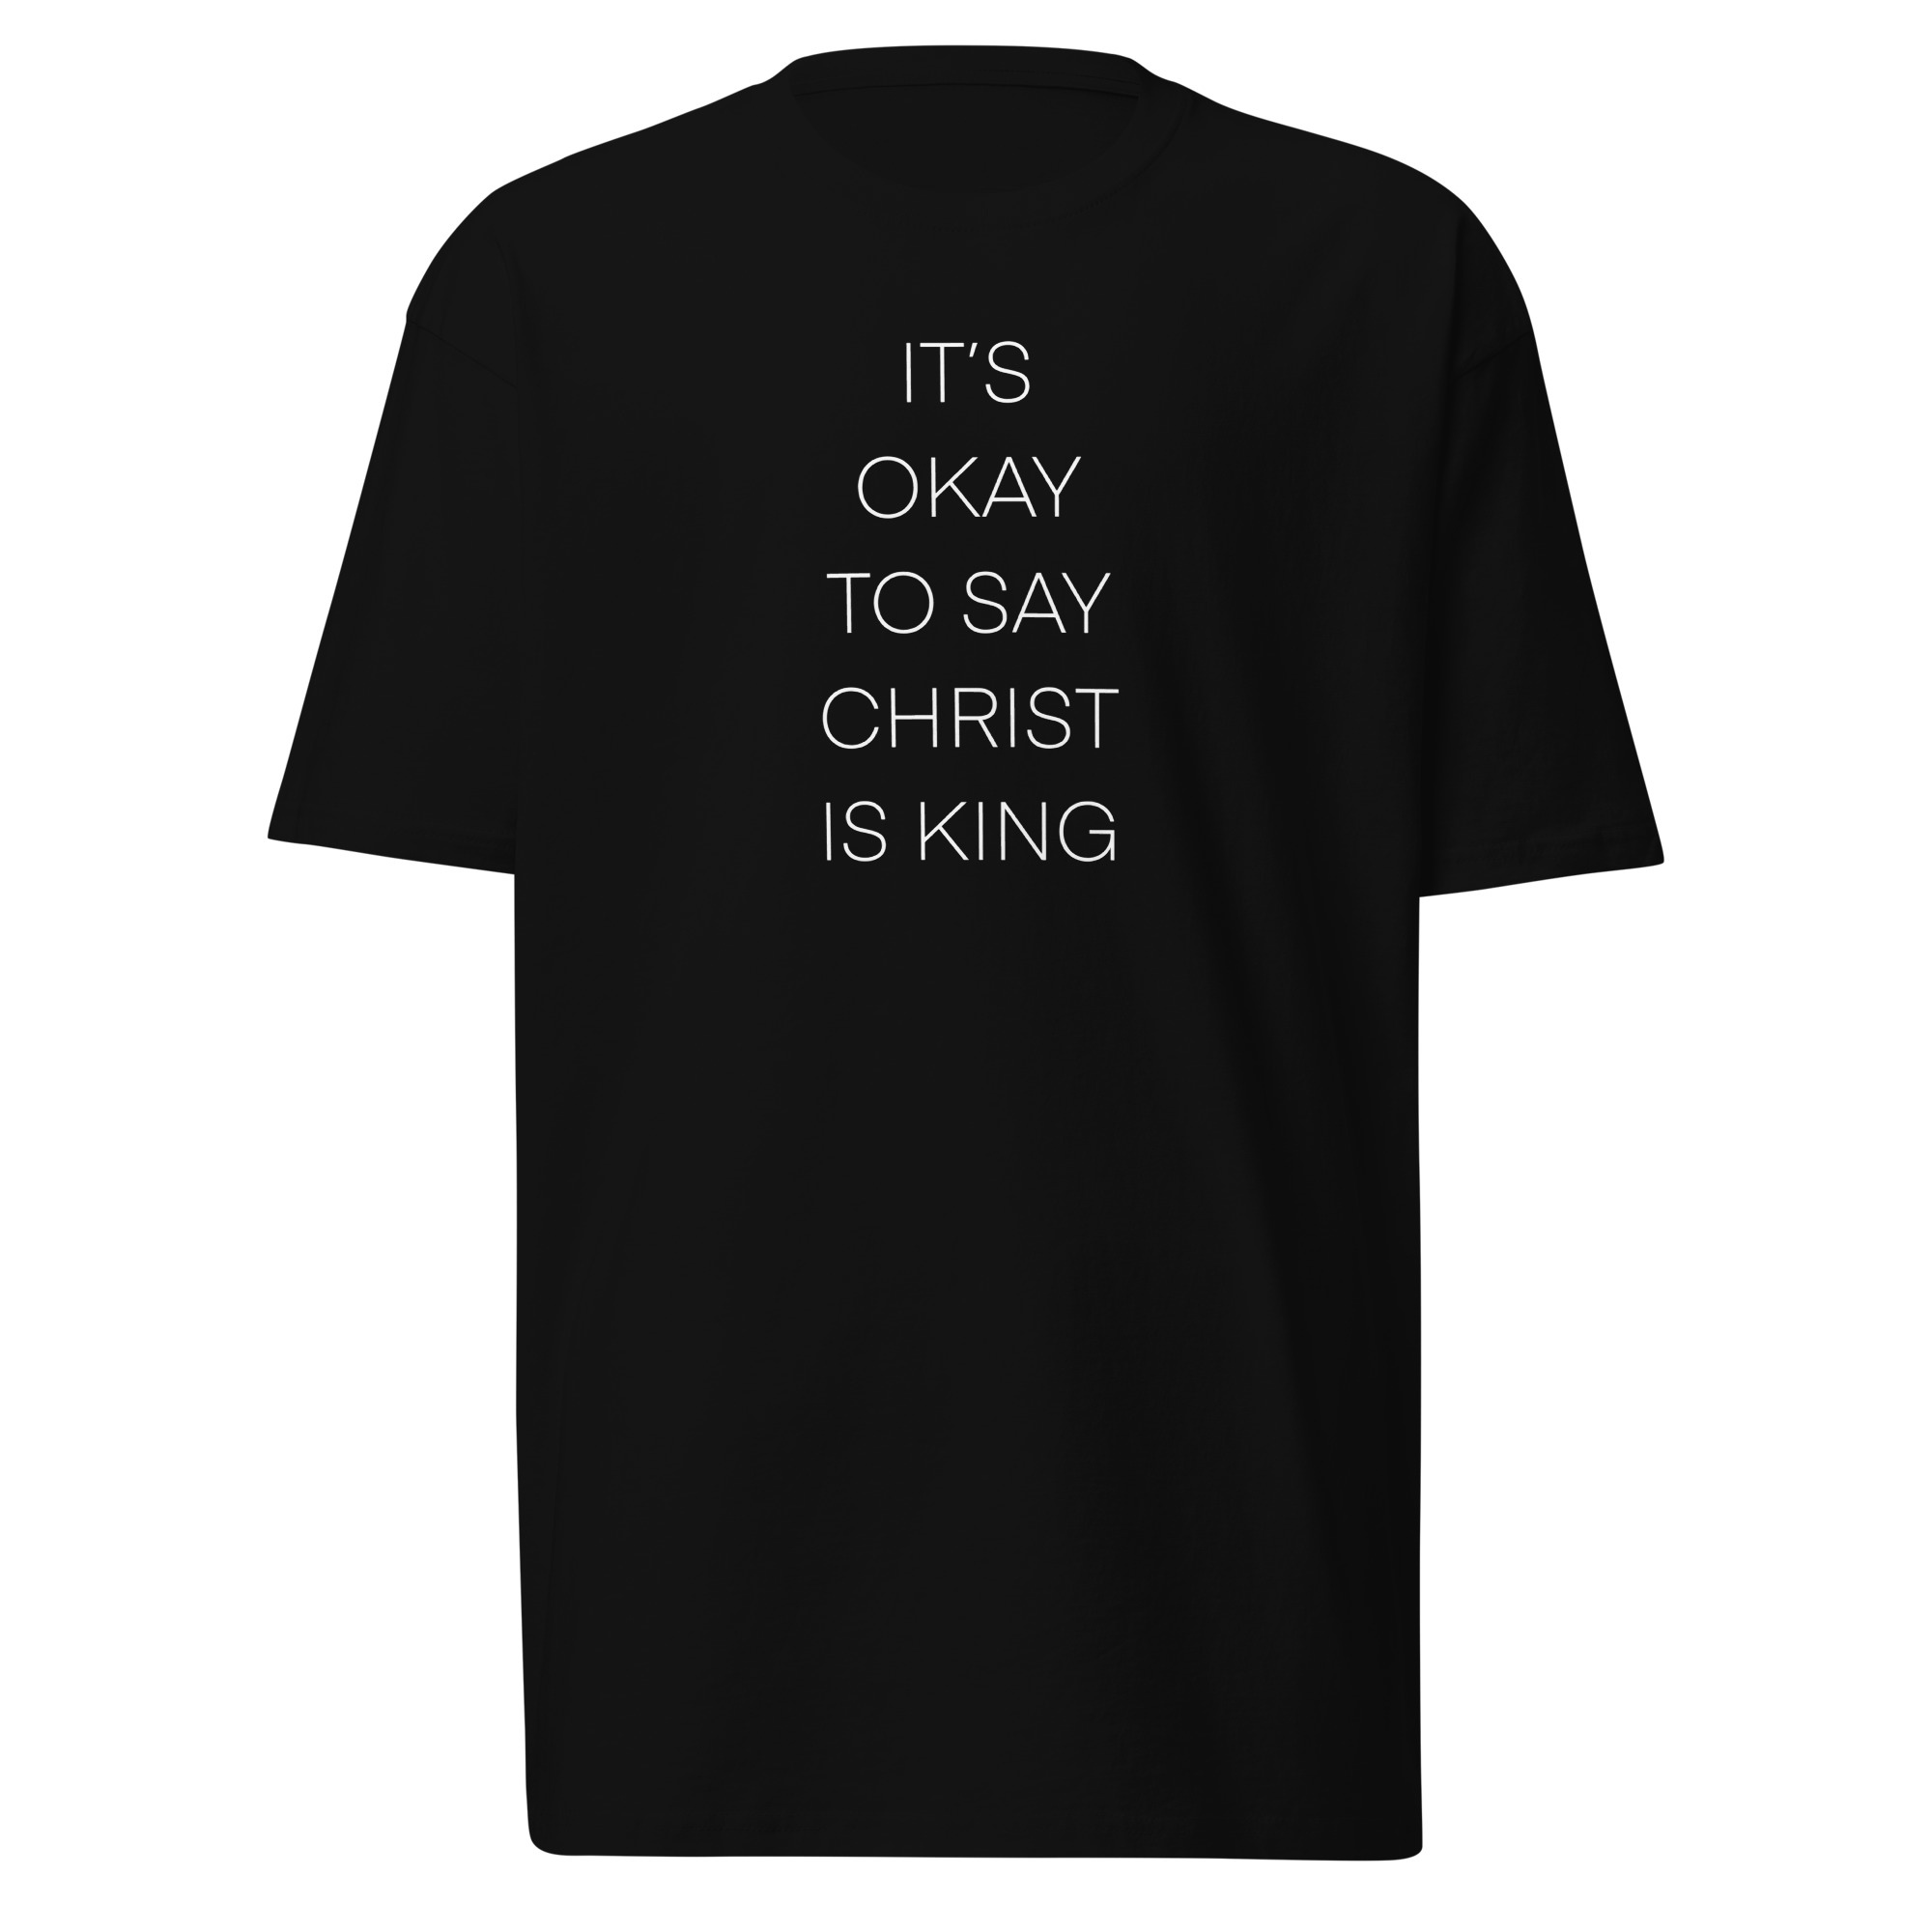 It's Okay To Say Christ Is King T-Shirt - Black / S